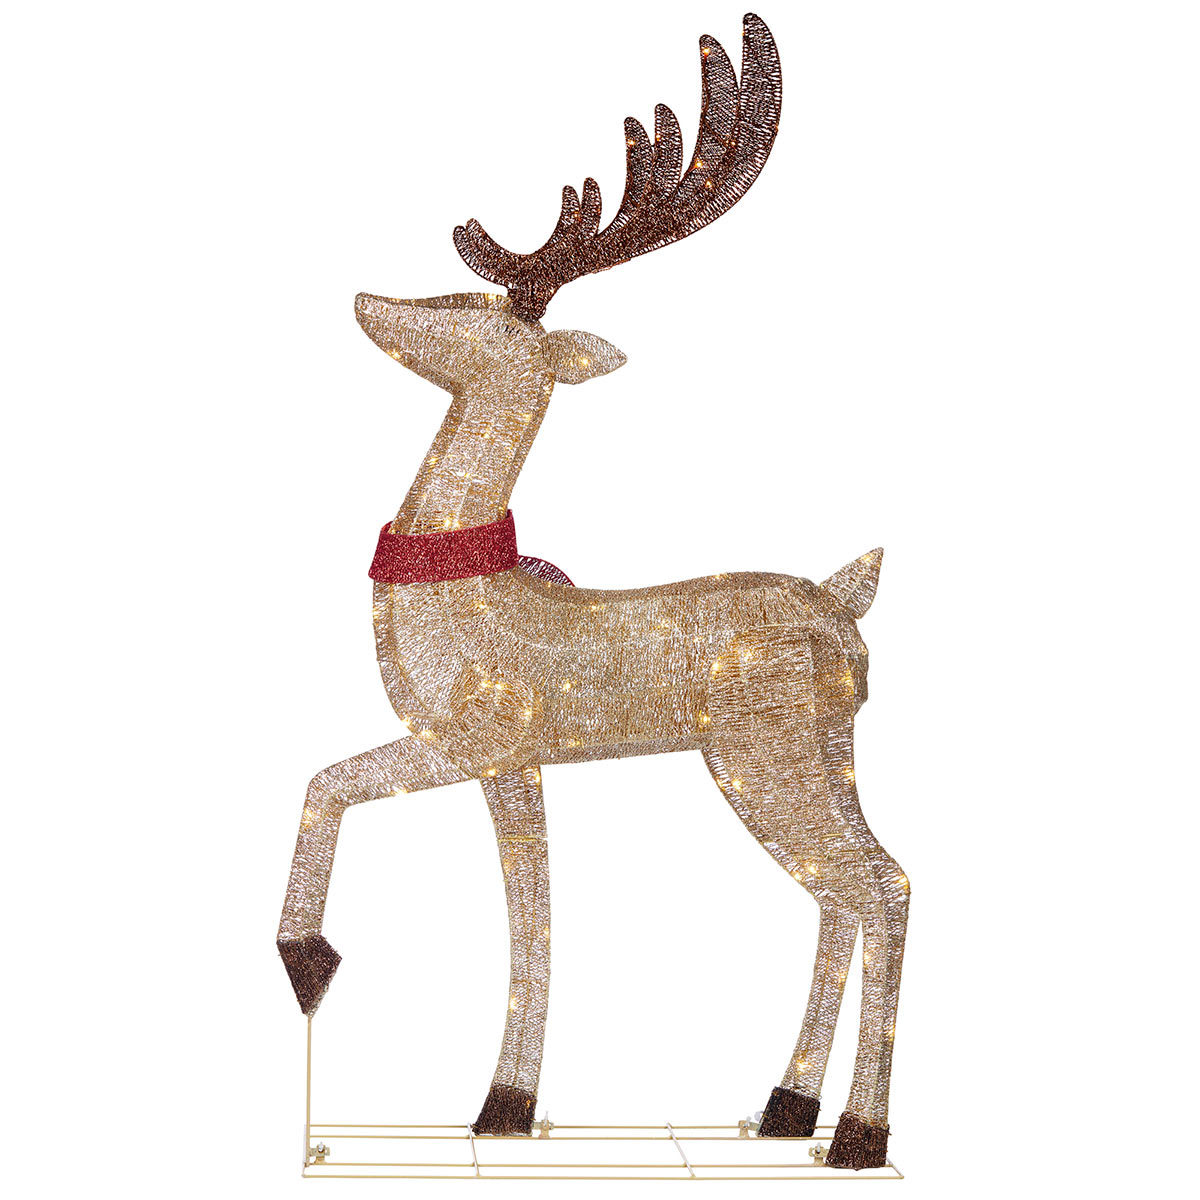 Side view of deer facing the left on a white background